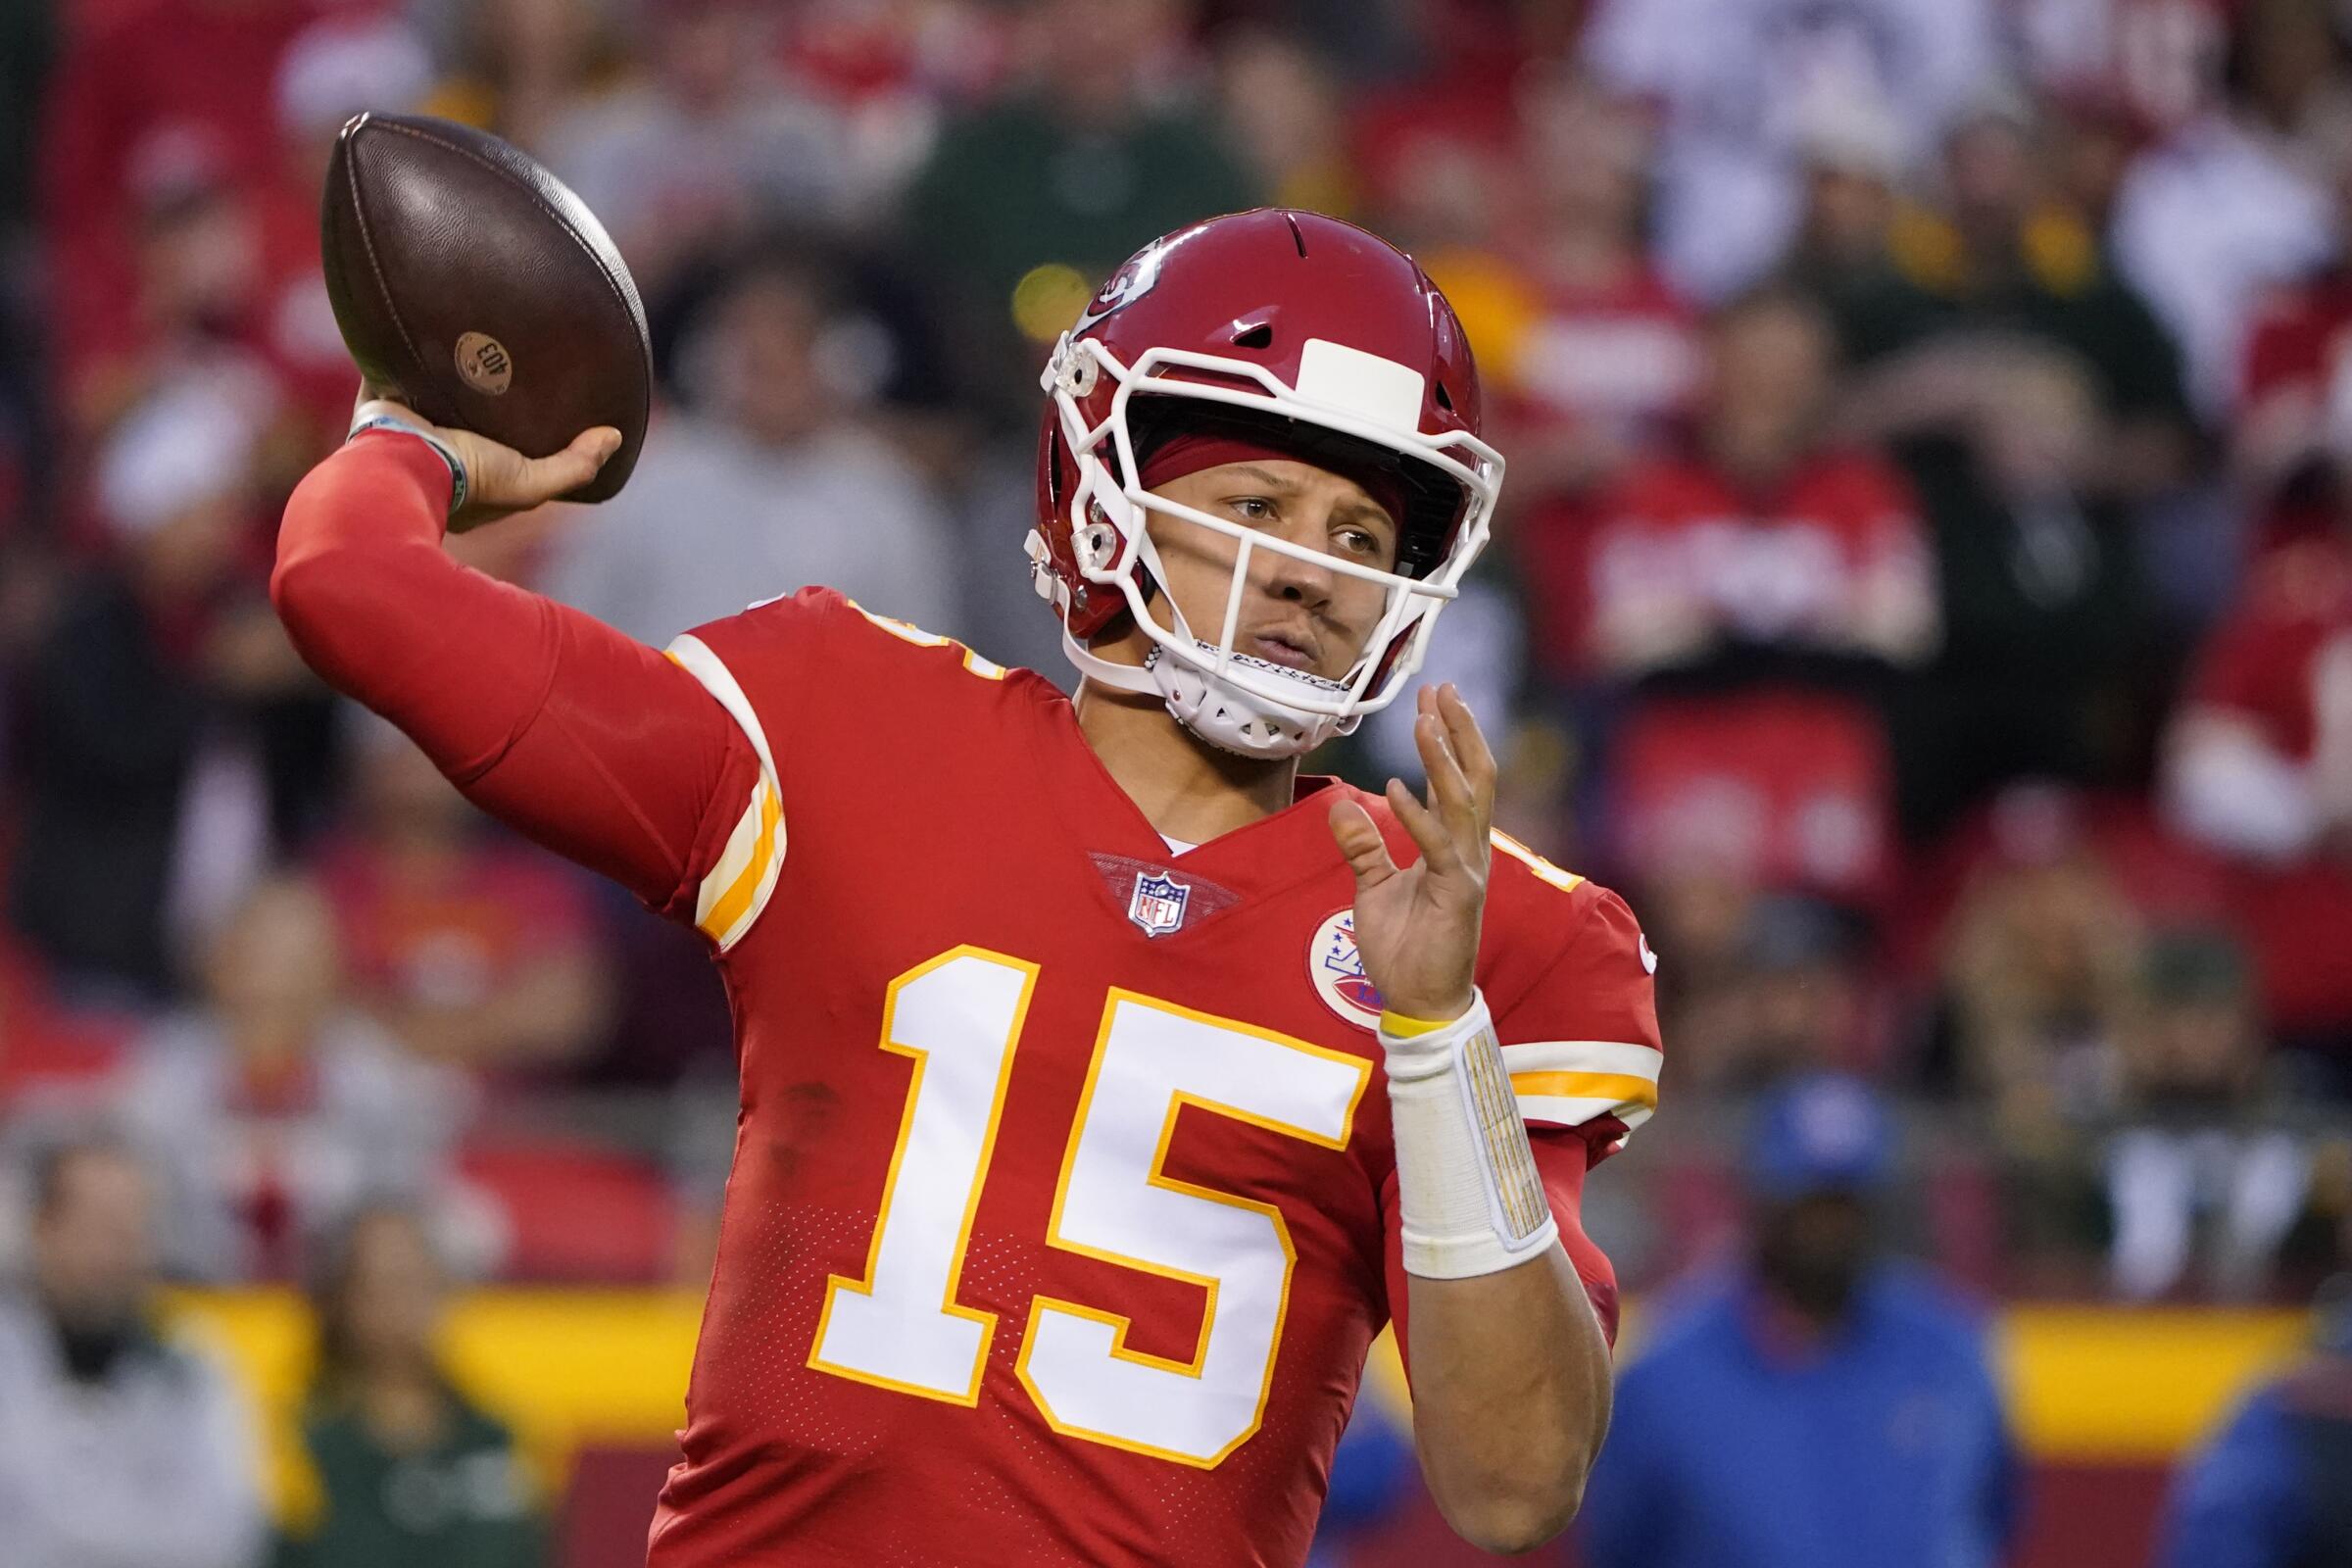 Kansas City Chiefs quarterback Patrick Mahomes throws during the second half against the Green Bay Packers.